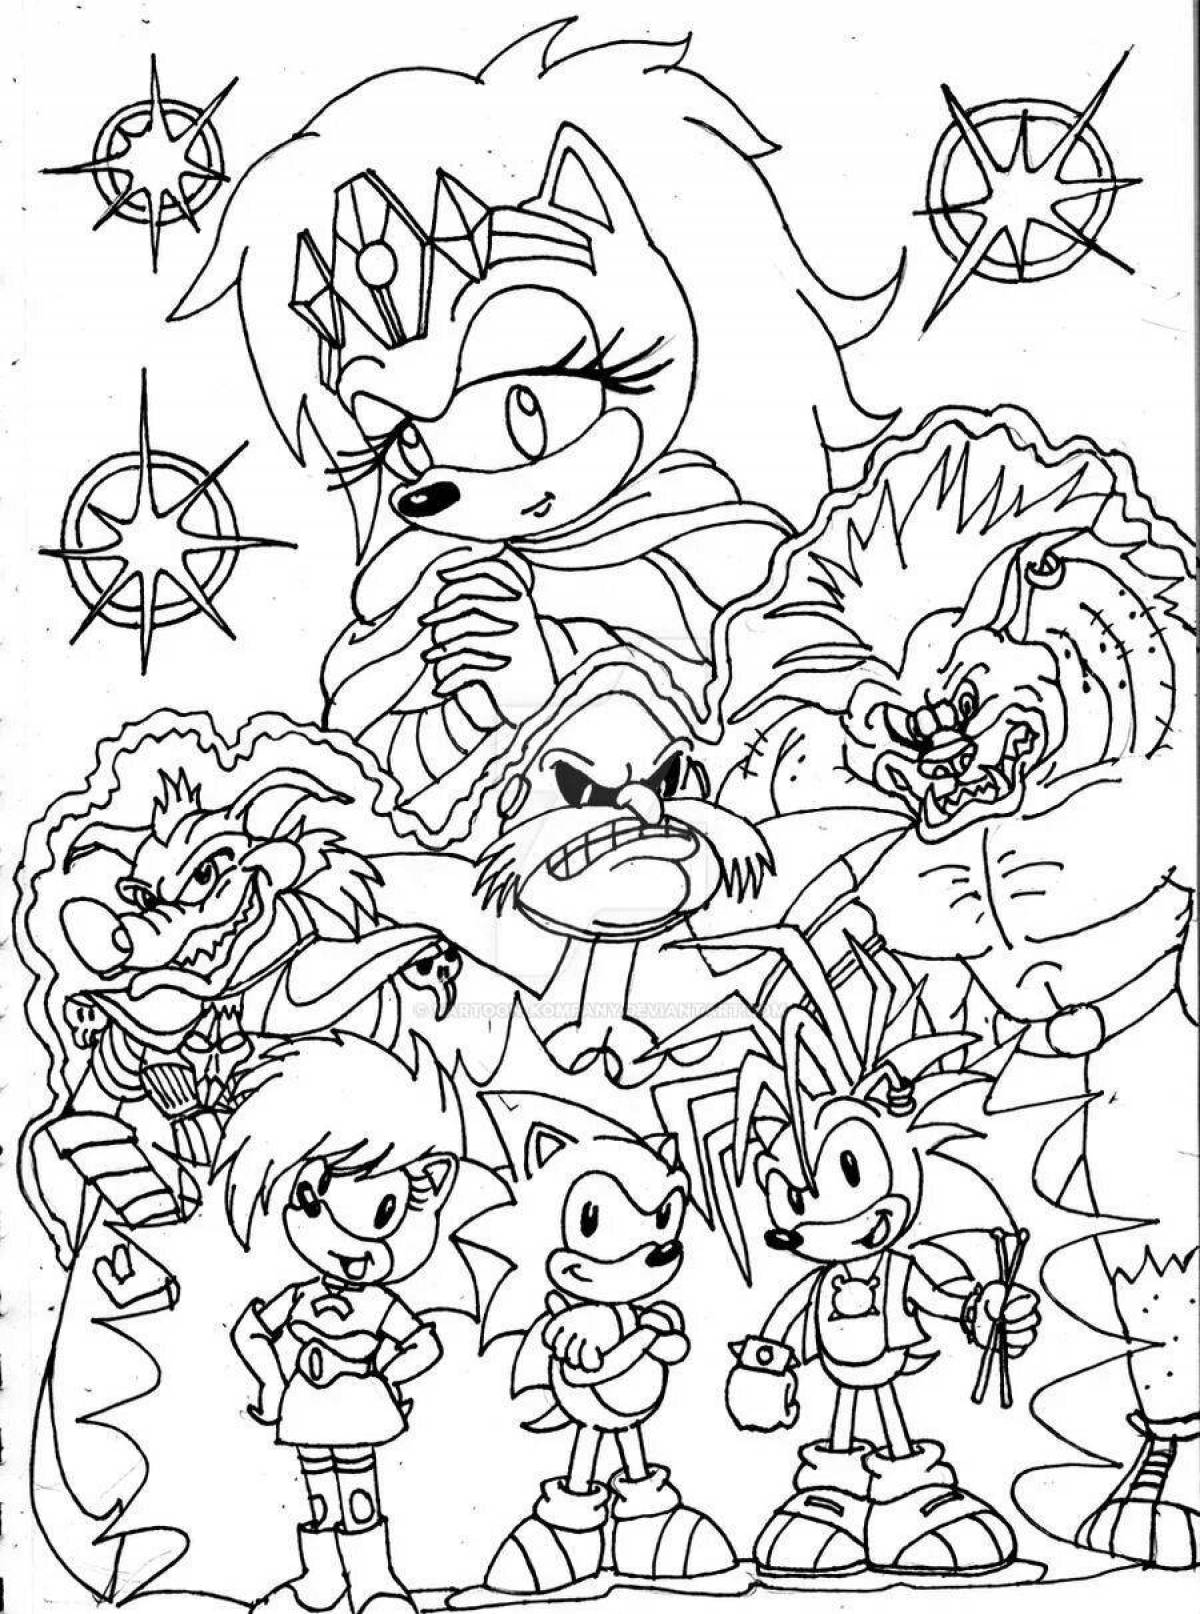 Sonic new amazing coloring page